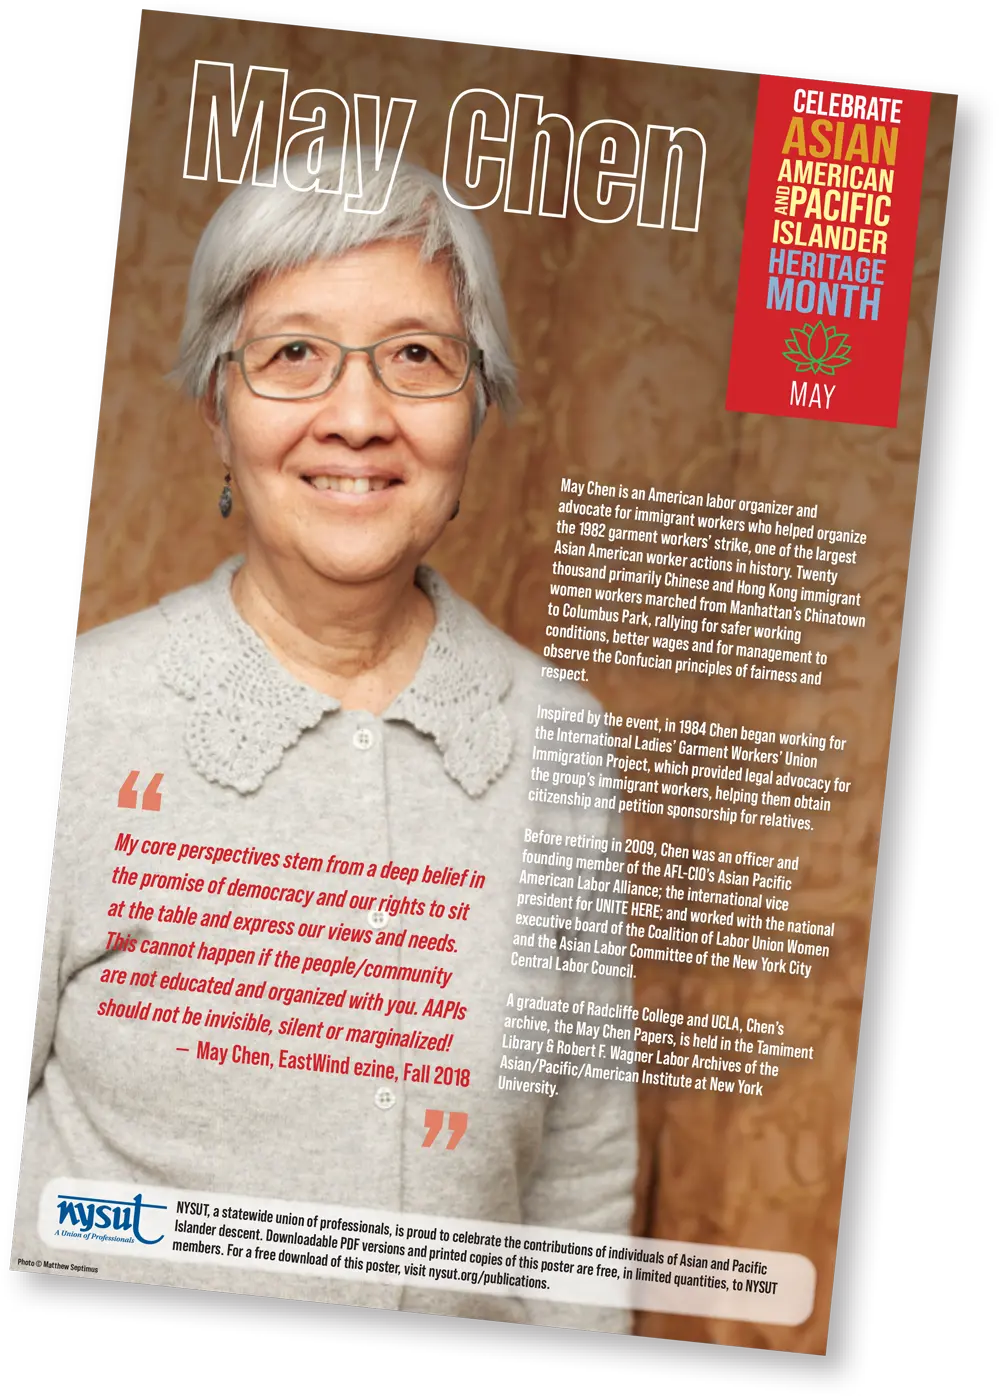 an NYSUT poster featuring American labor organizer and advocate May Chen in celebration of Asian American Pacific Islander Heritage Month